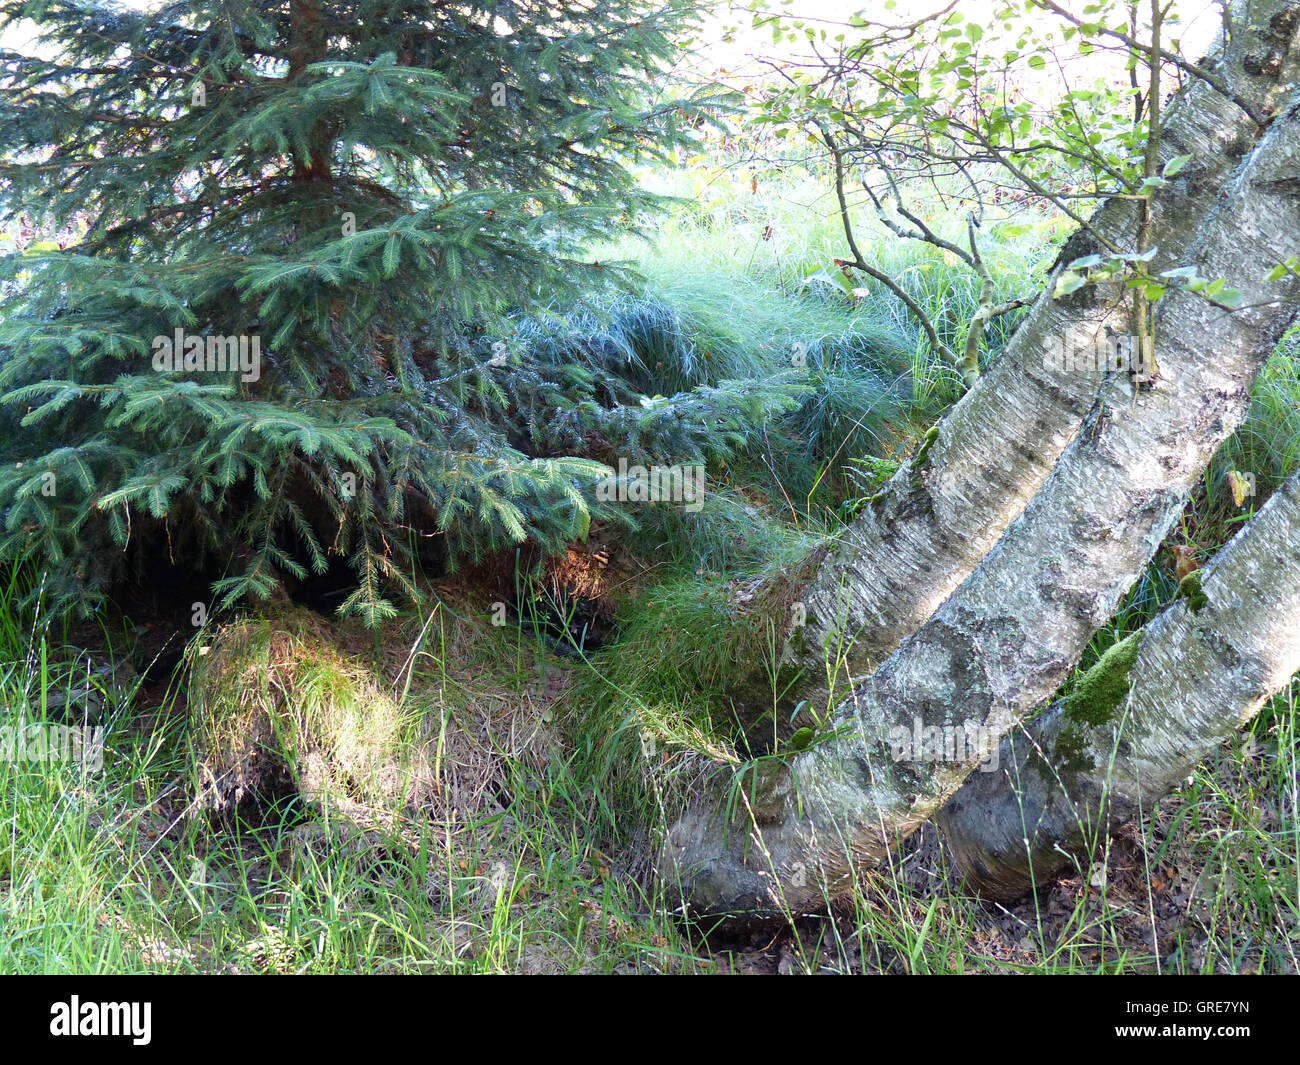 Uprooted Tree Provides Habitat For New Trees, The Natural Cycle Stock Photo